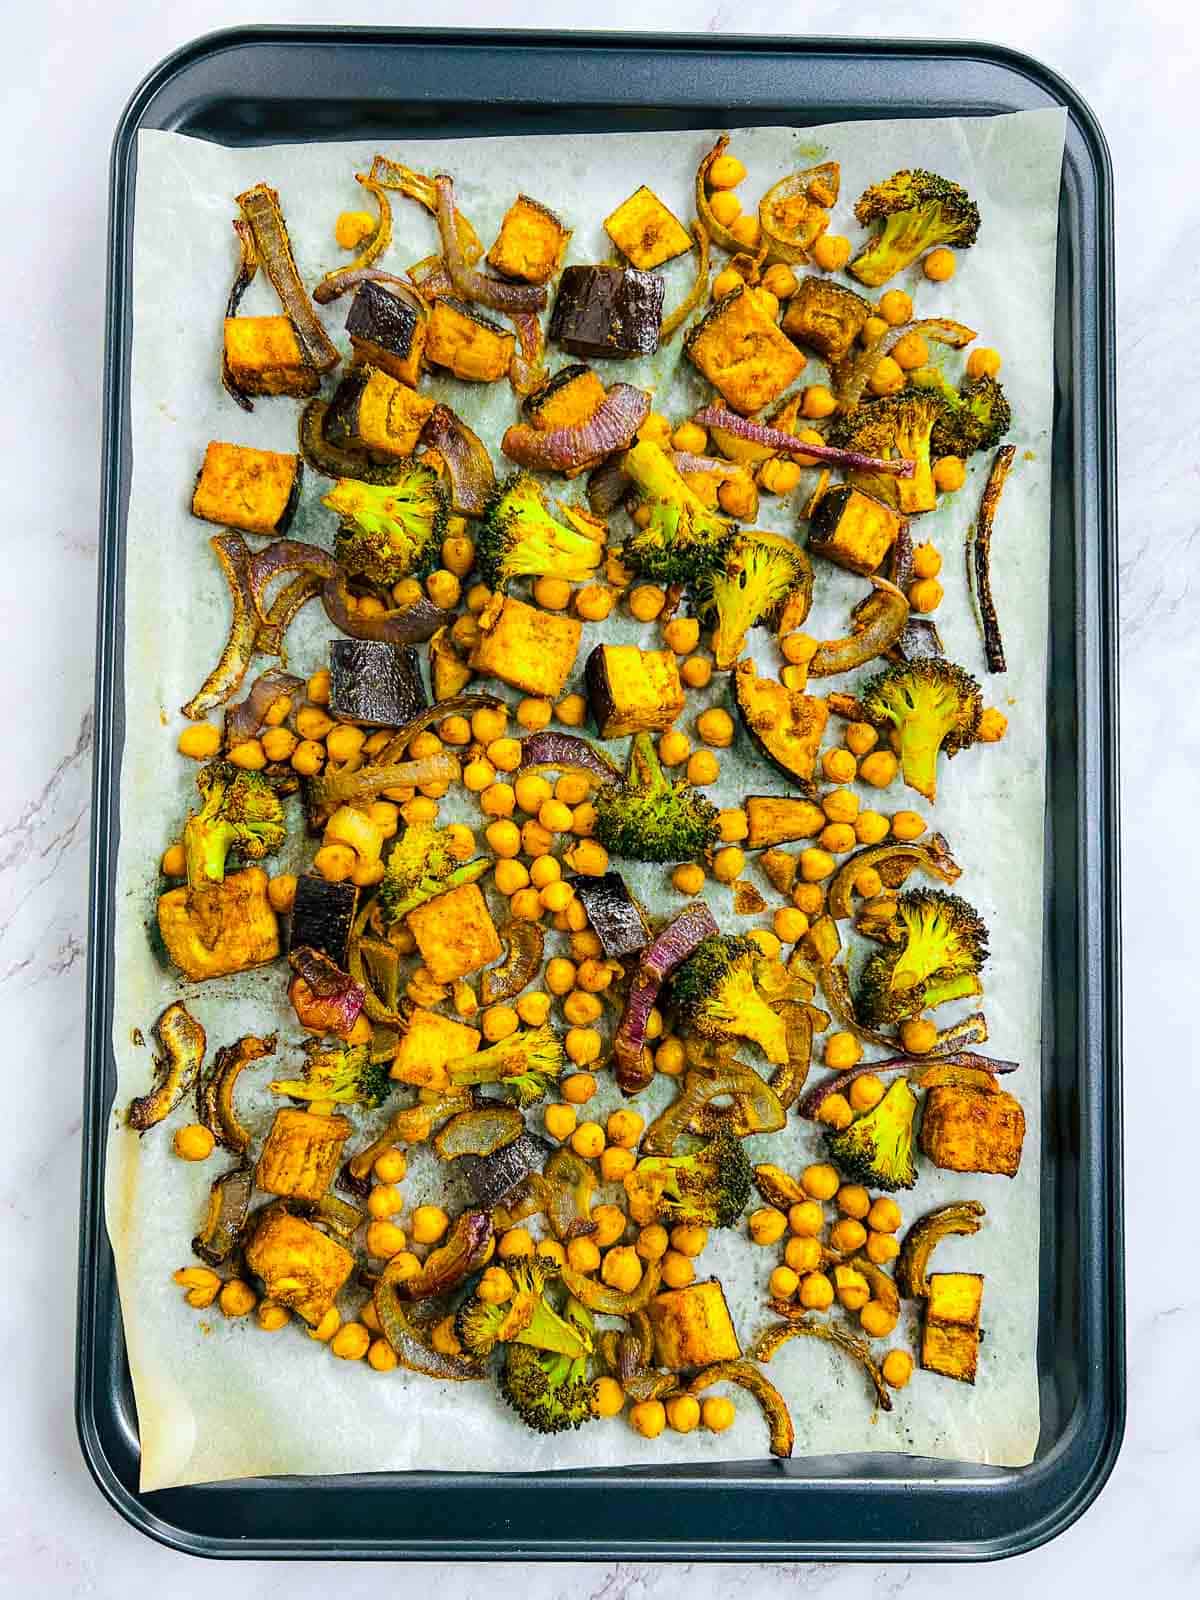 Roasted veggies and chickpeas on a baking sheet.